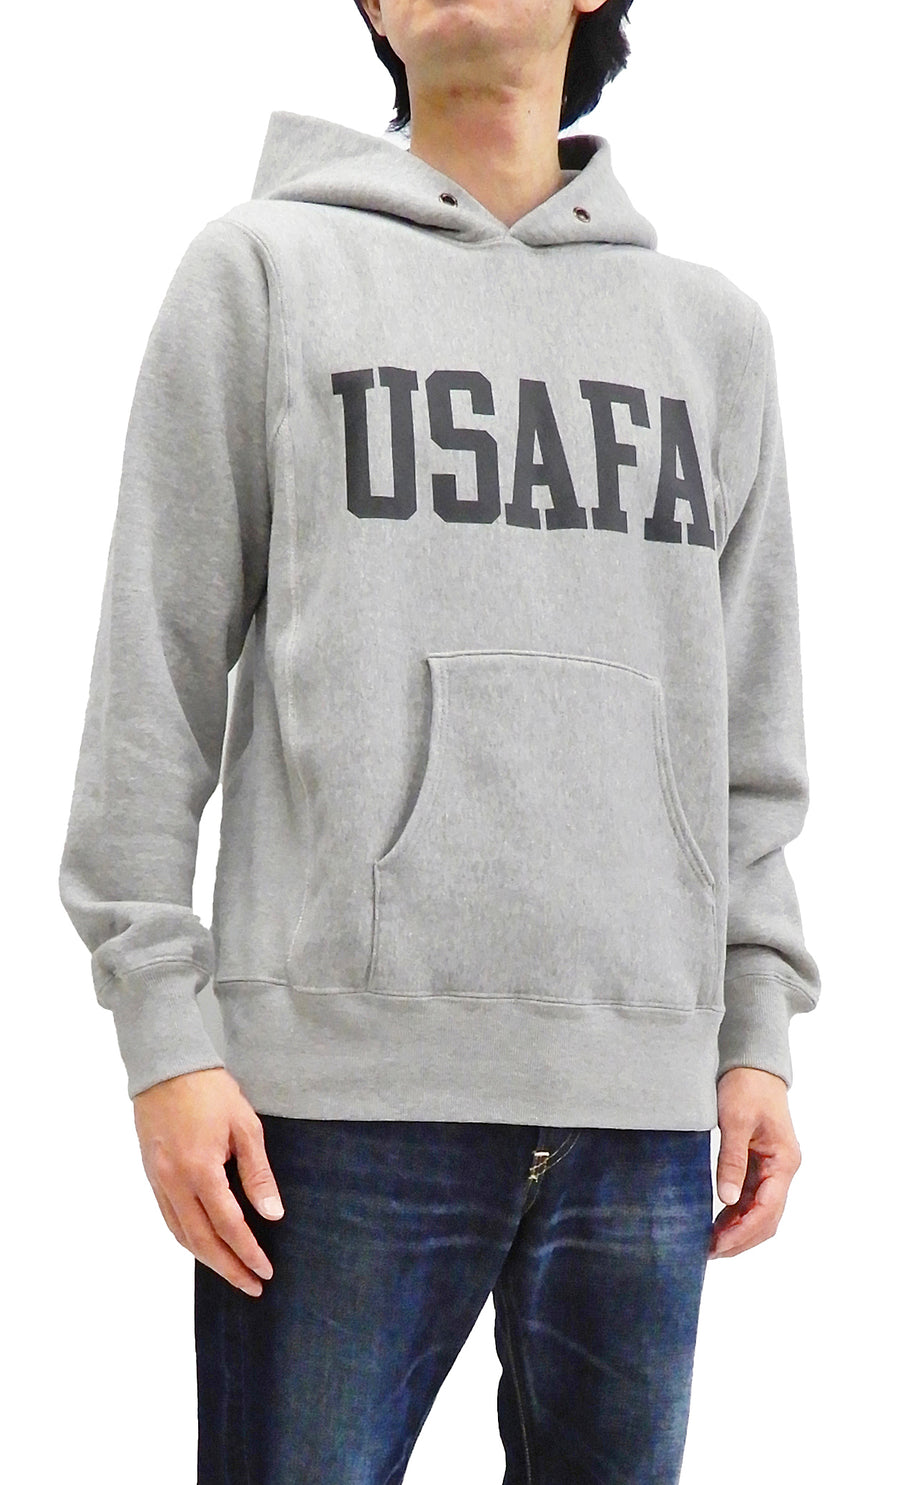 Buzz Rickson Pullover Hoodie Men's Reproduction of U.S. Air Force